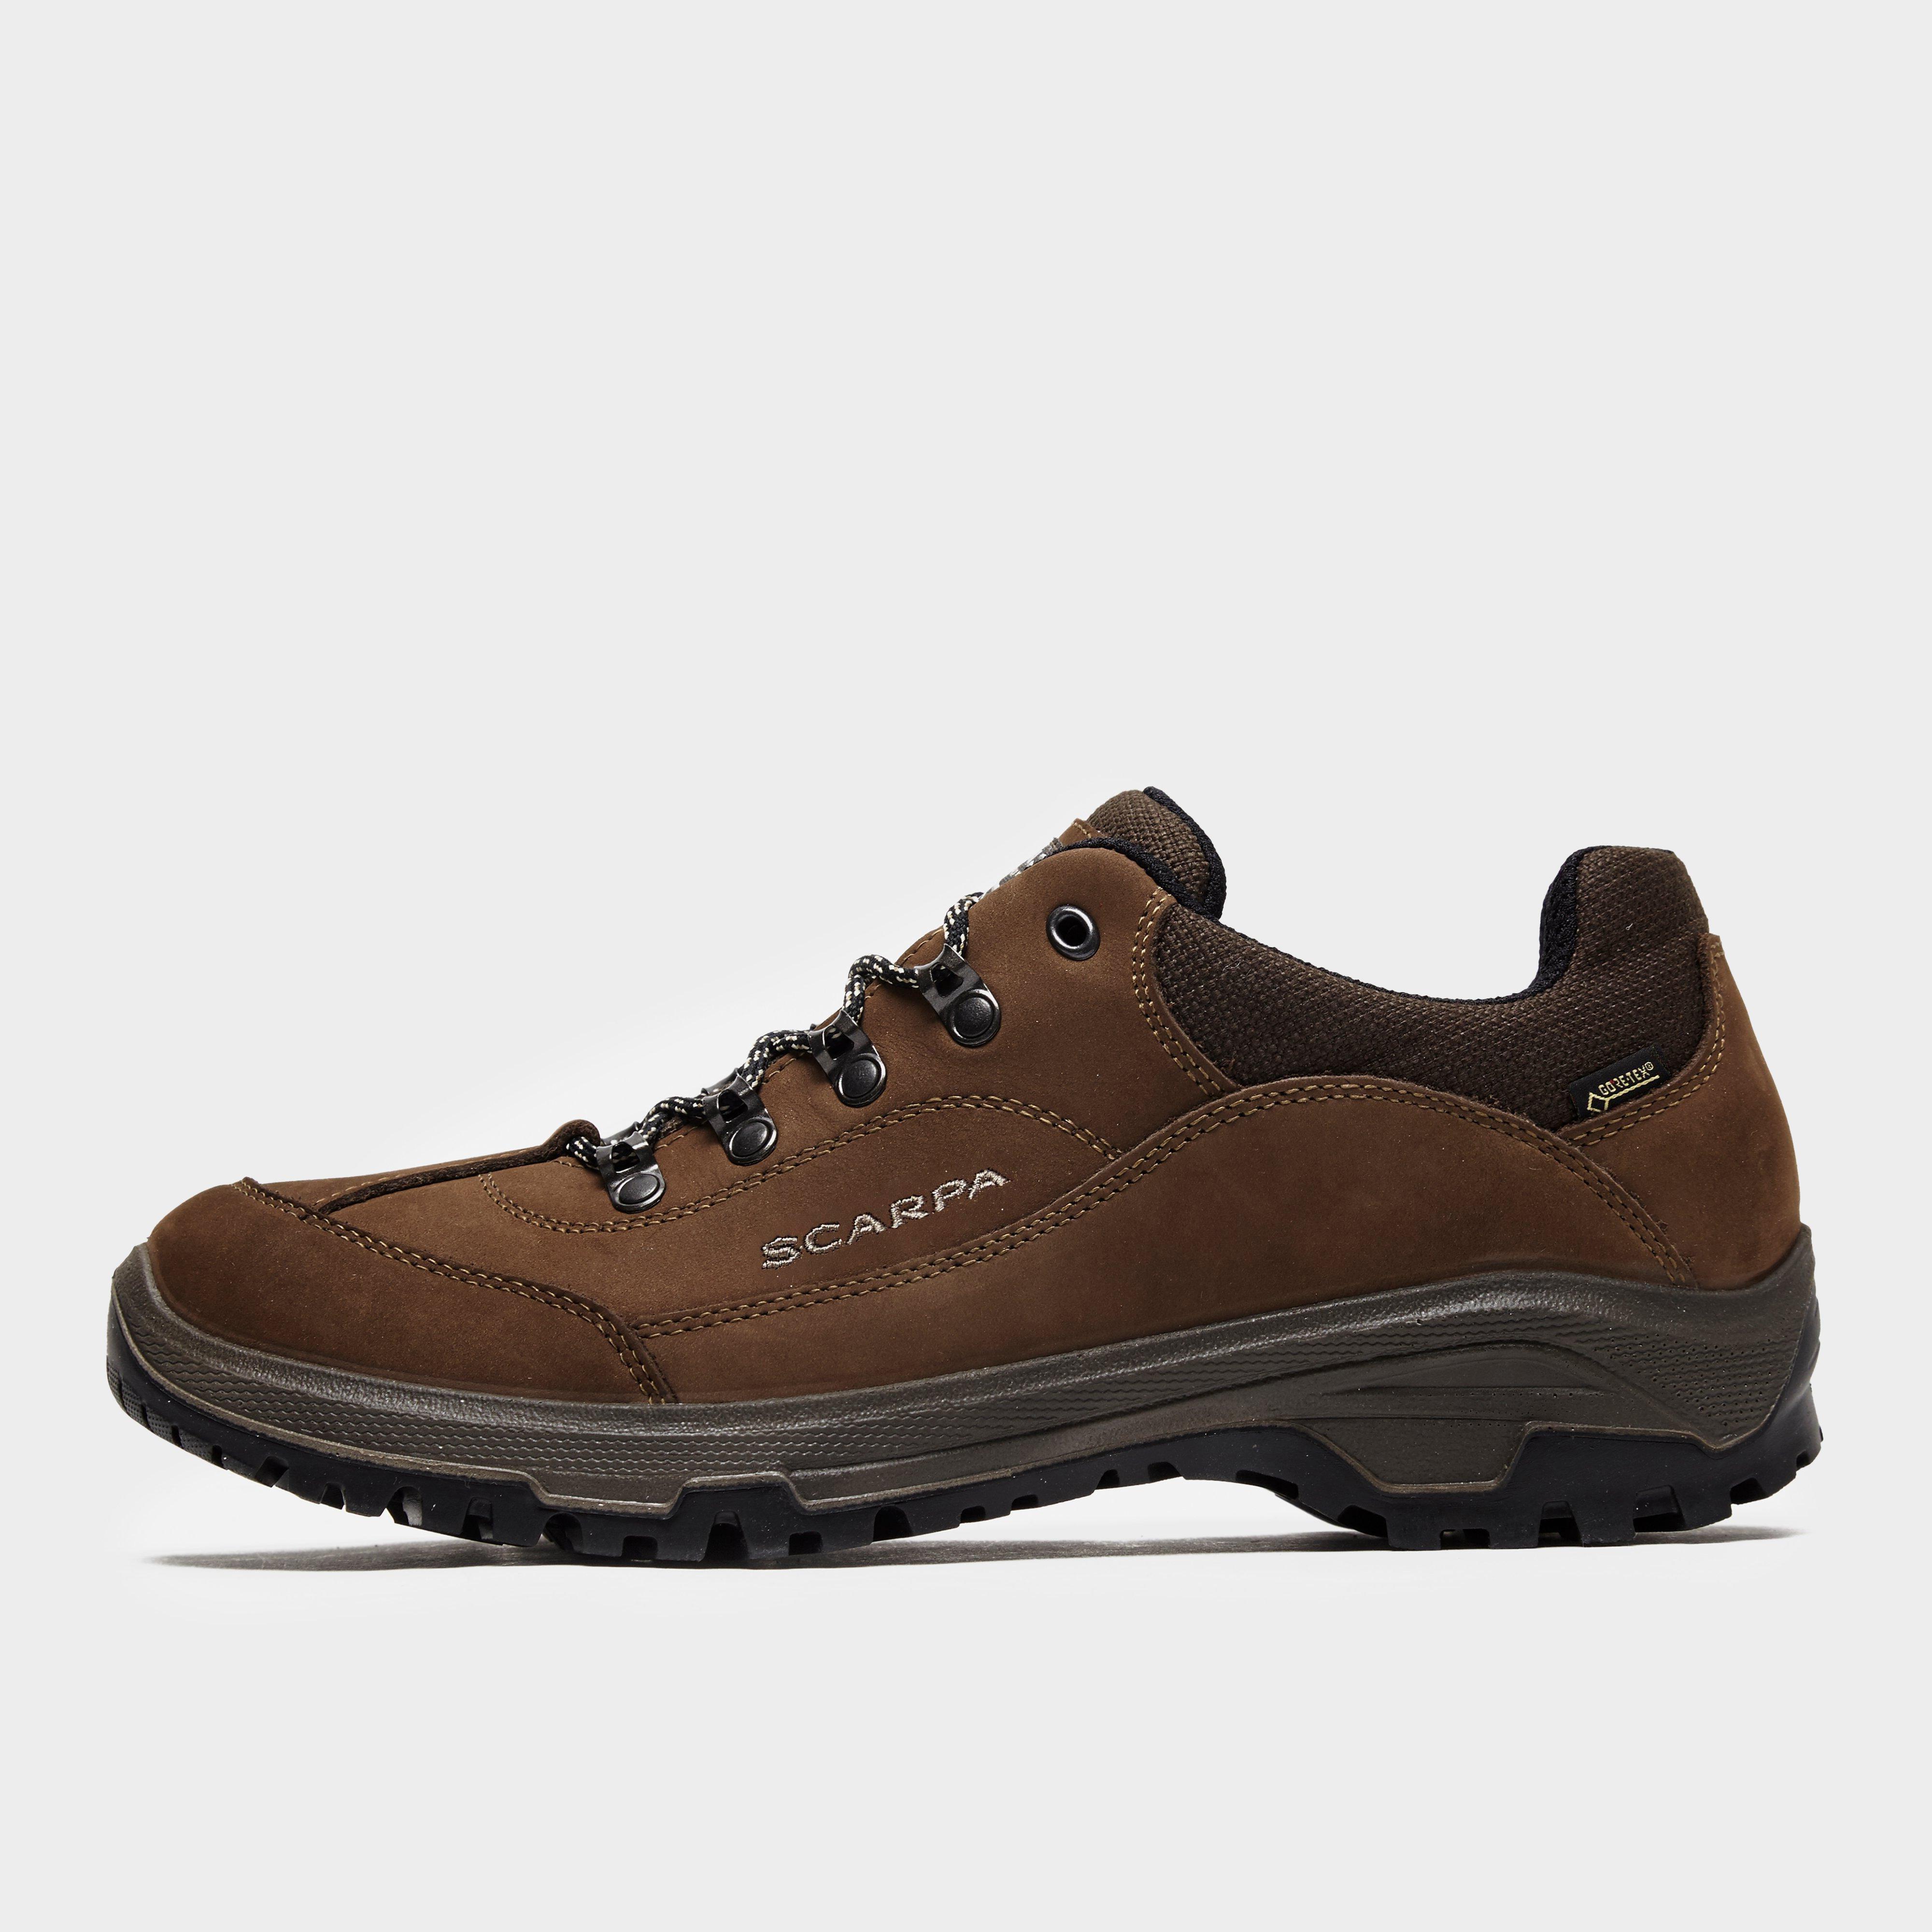 Mens Cyrus GORE TEX® Walking Shoe Prices and Reviews Outr.co.uk